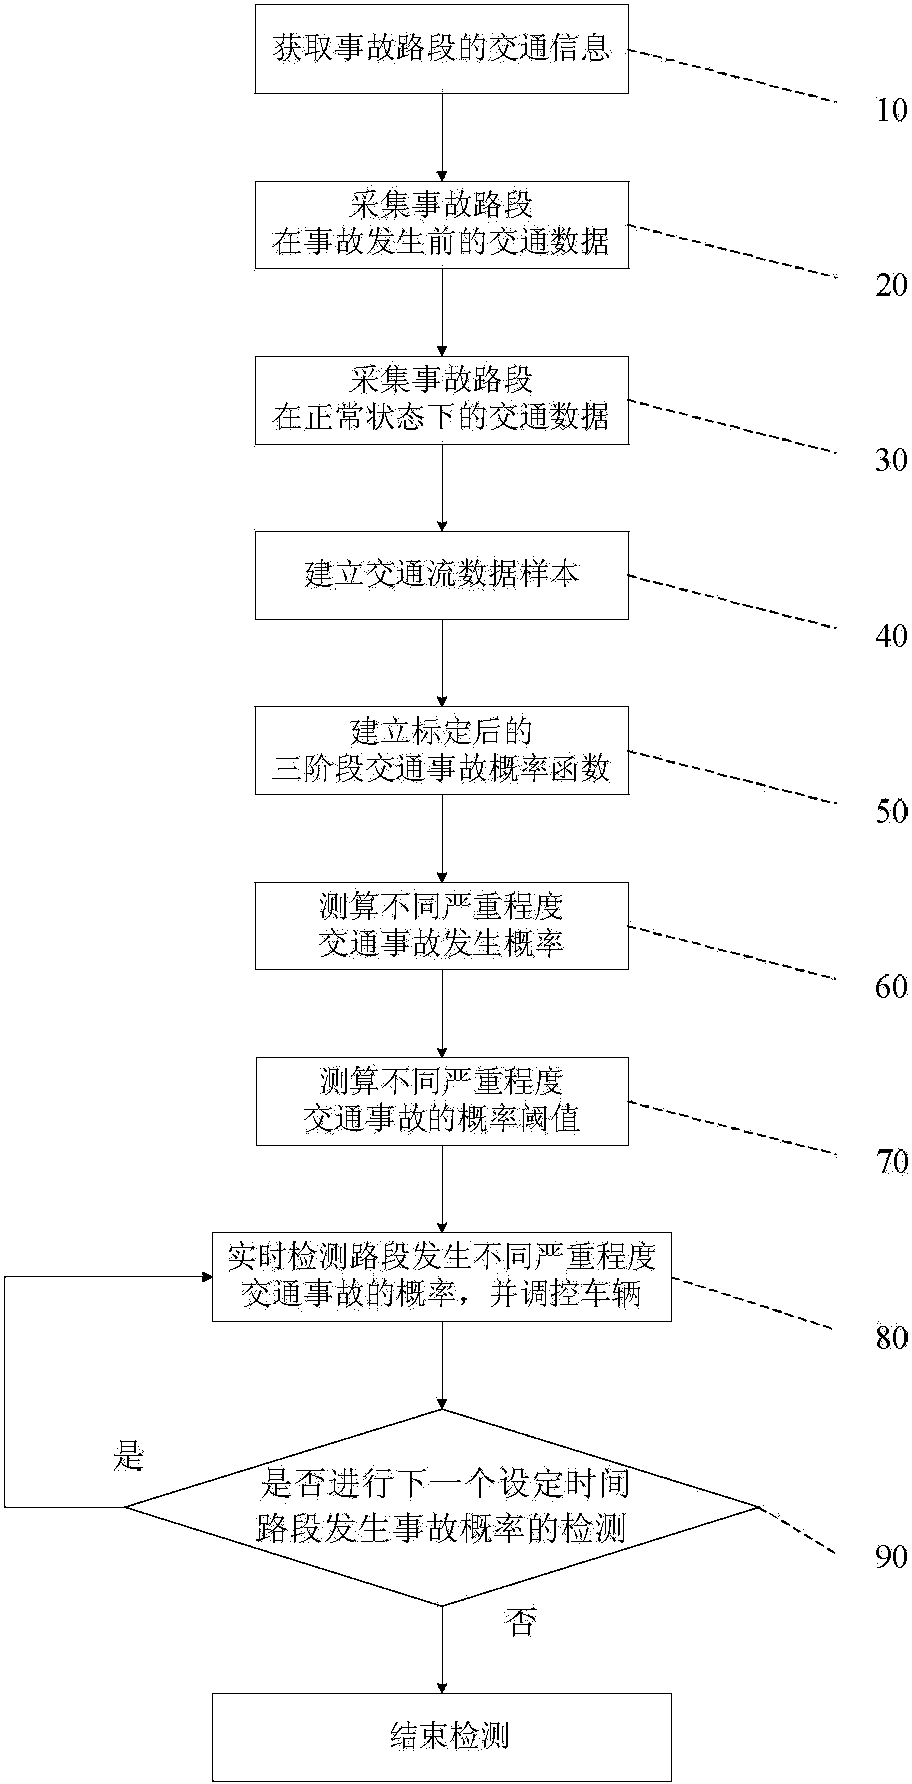 Vehicle regulating and controlling method of lowering probability of traffic accidents of different severity